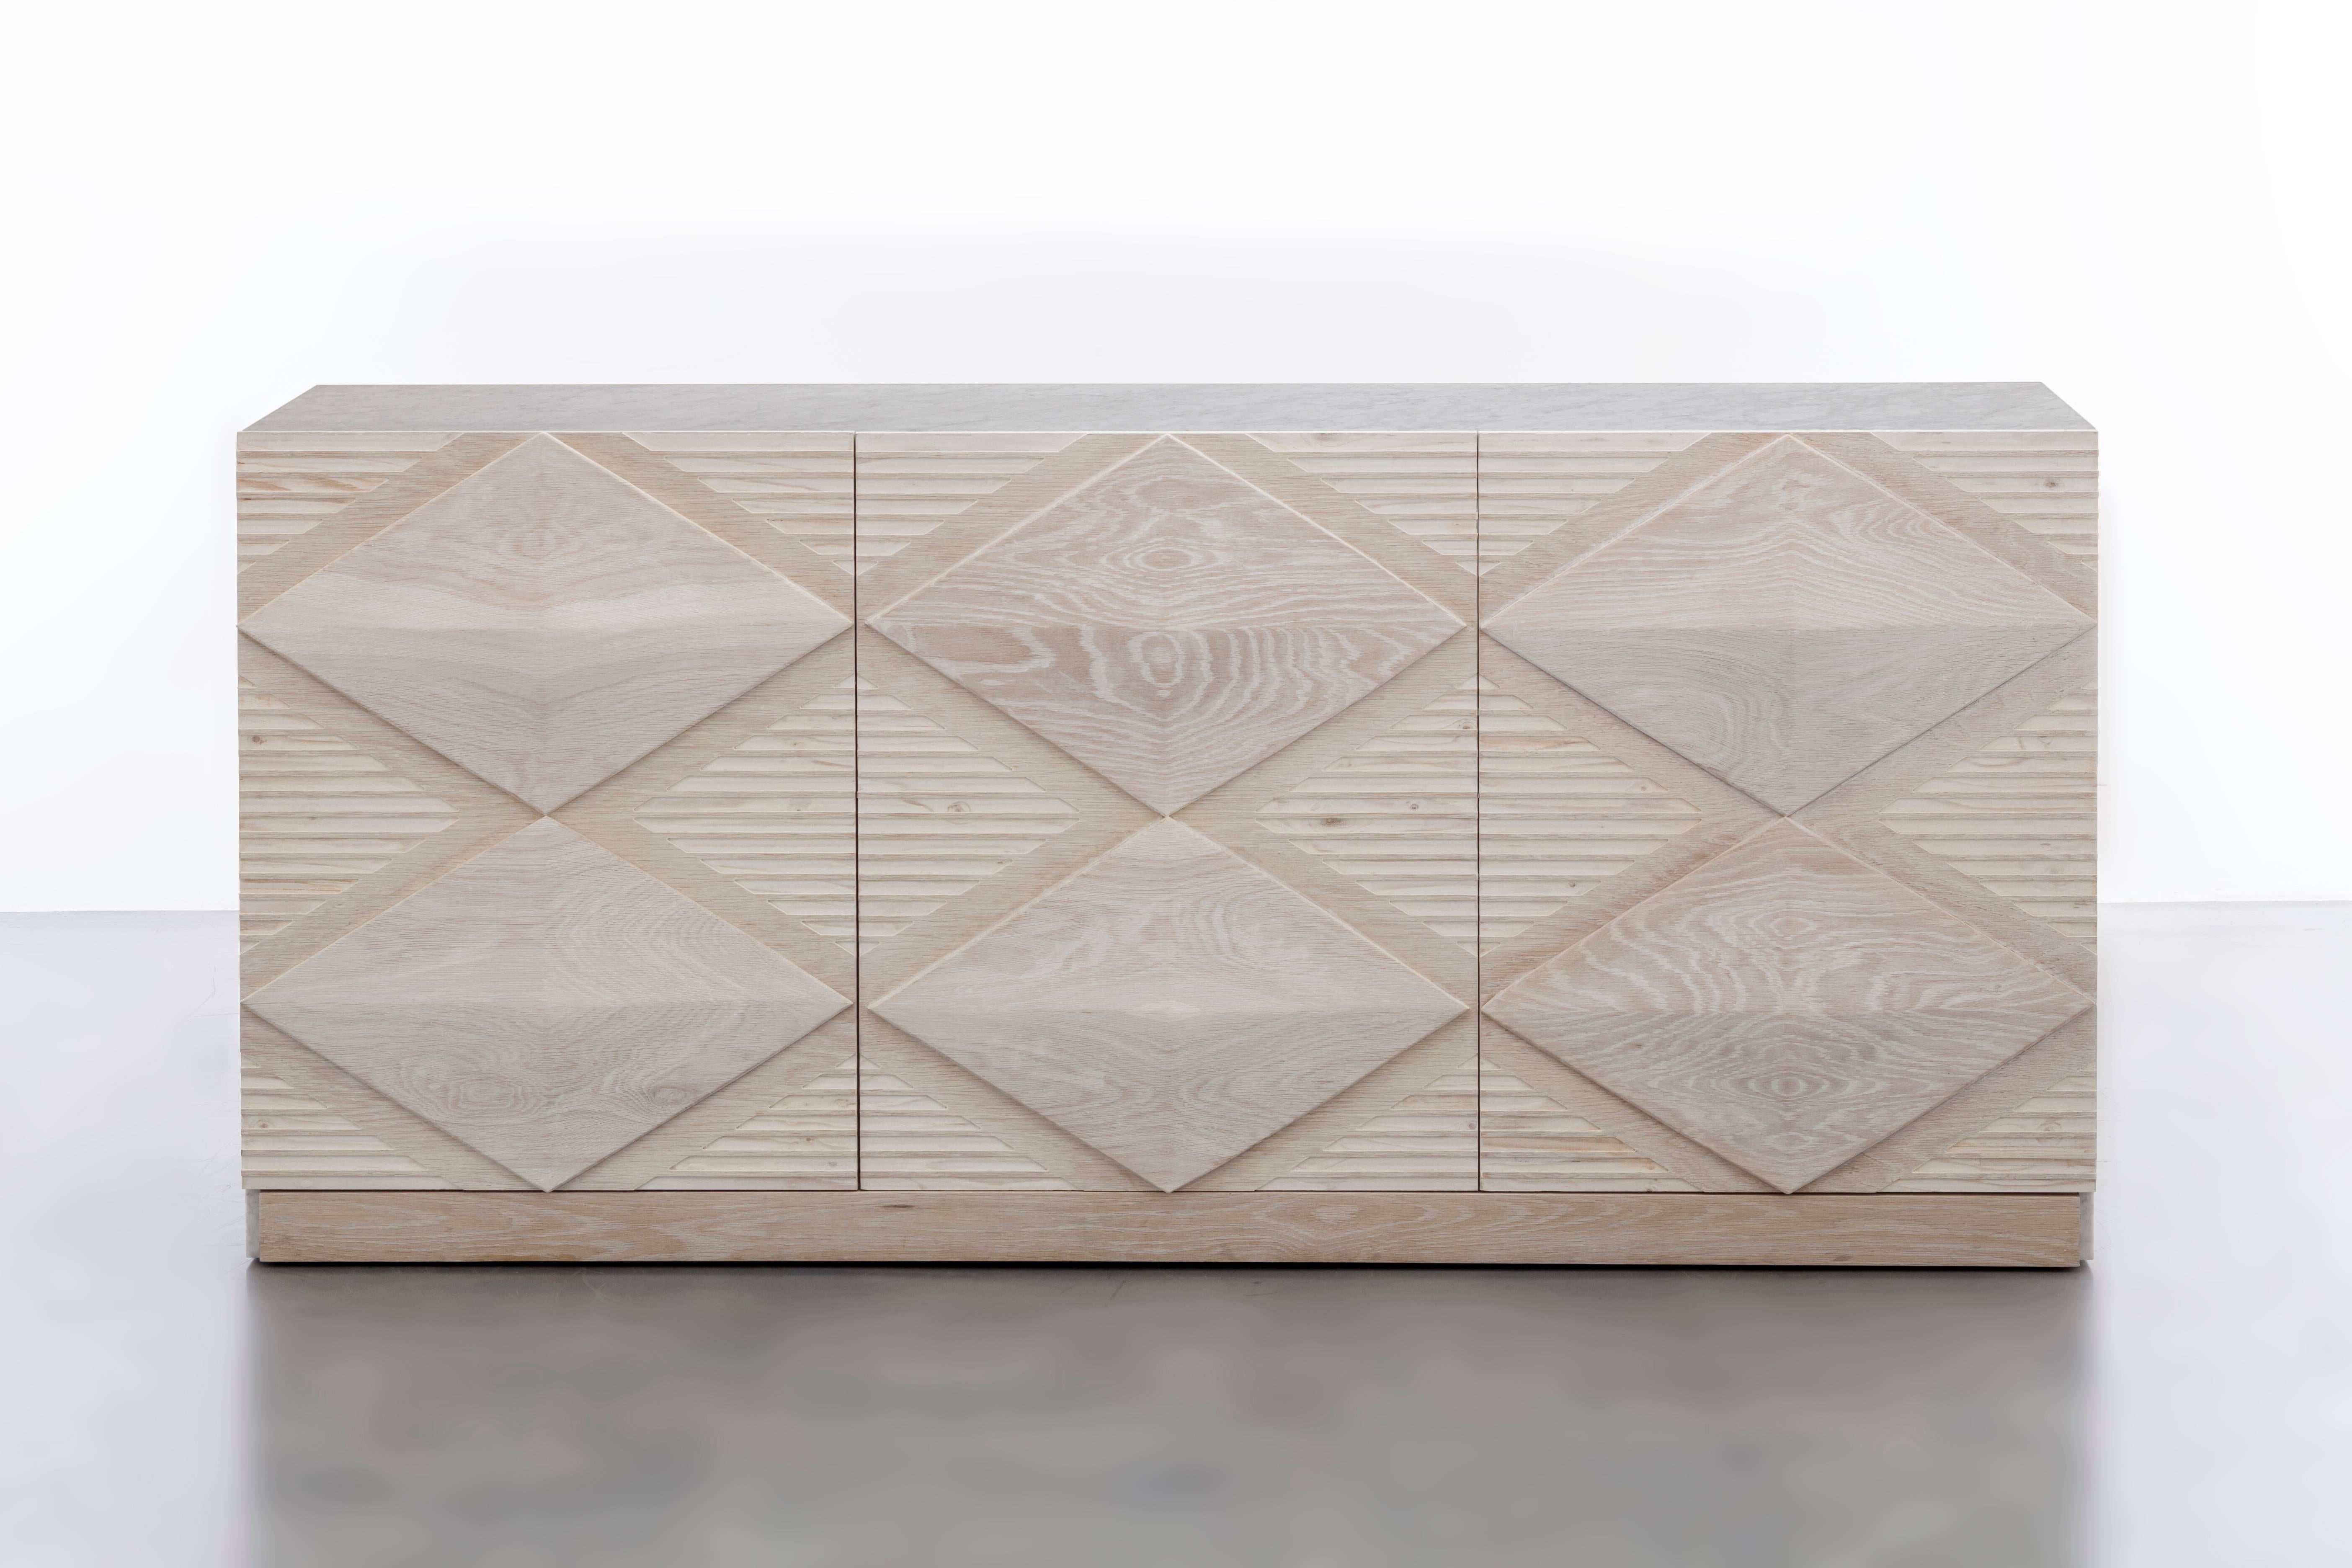 INES BUFFET CABINET - Modern Bleached Oak with Hand_Carved Design and Marble Top

The Ines Buffet Cabinet is a stunning piece of furniture that features a bleached white oak body with hand-carved oak diamond details and a luxurious waterfall Carrara